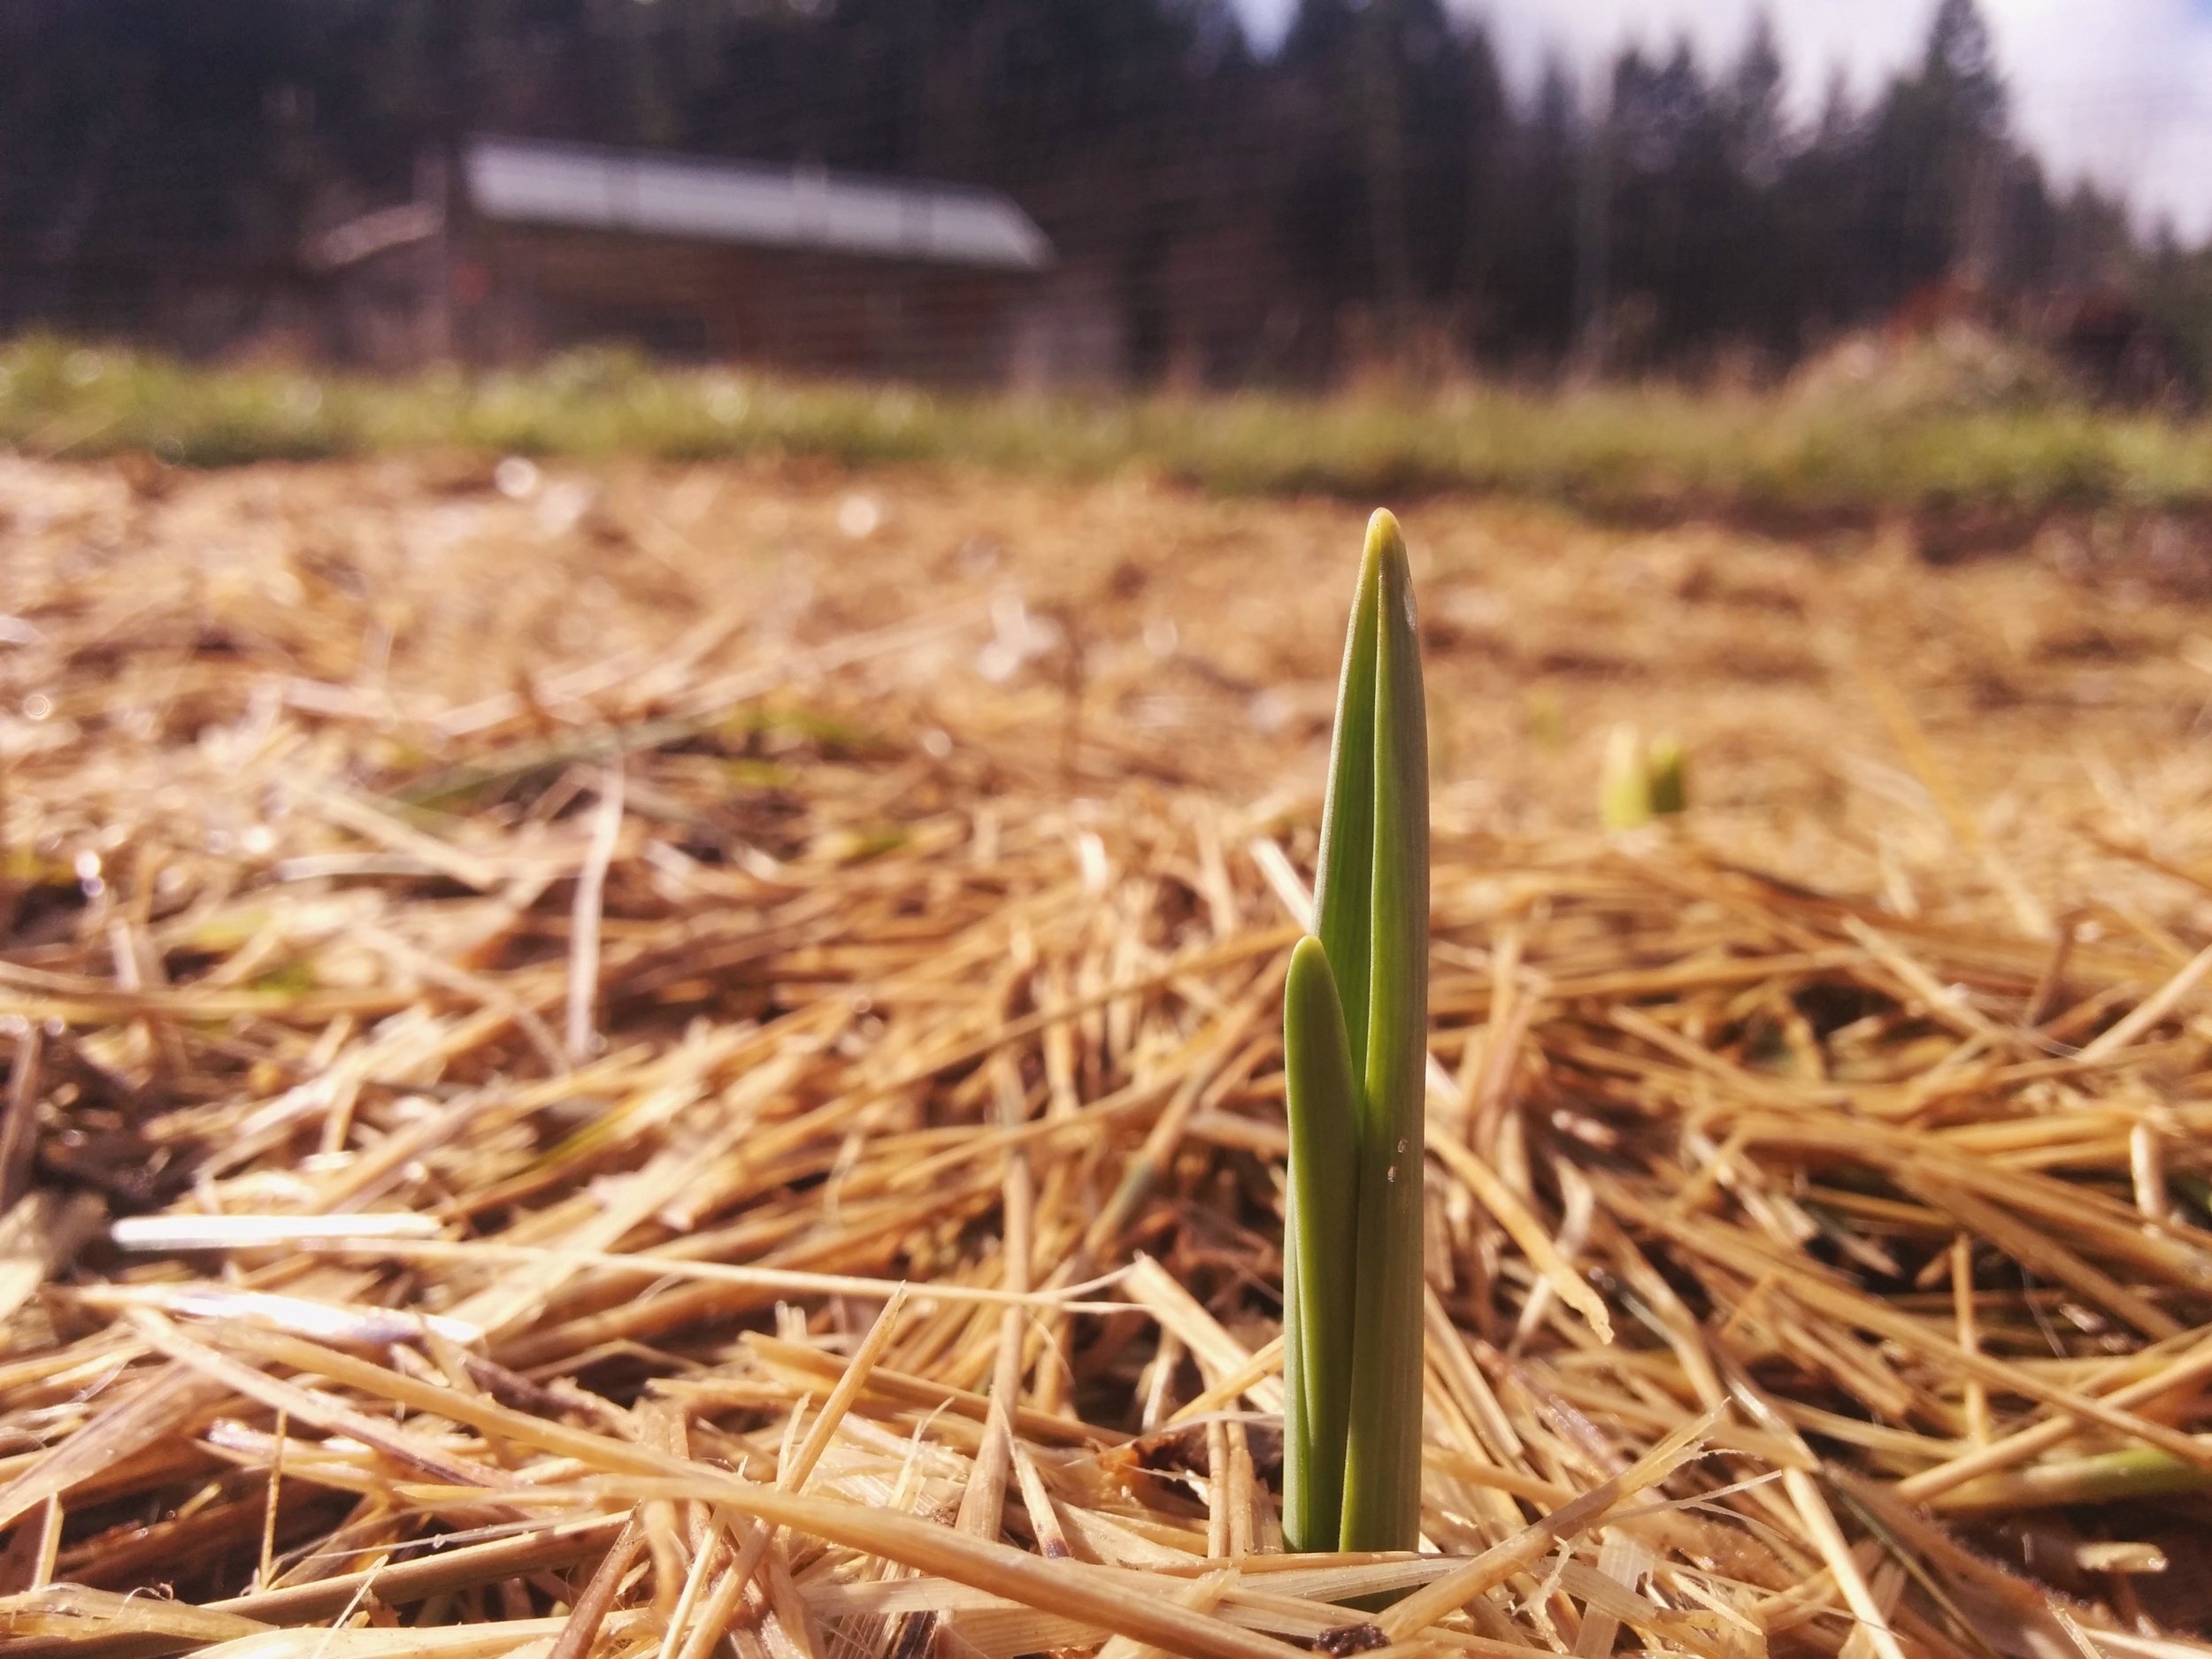 A garlic shoot coming through straw on the homestead